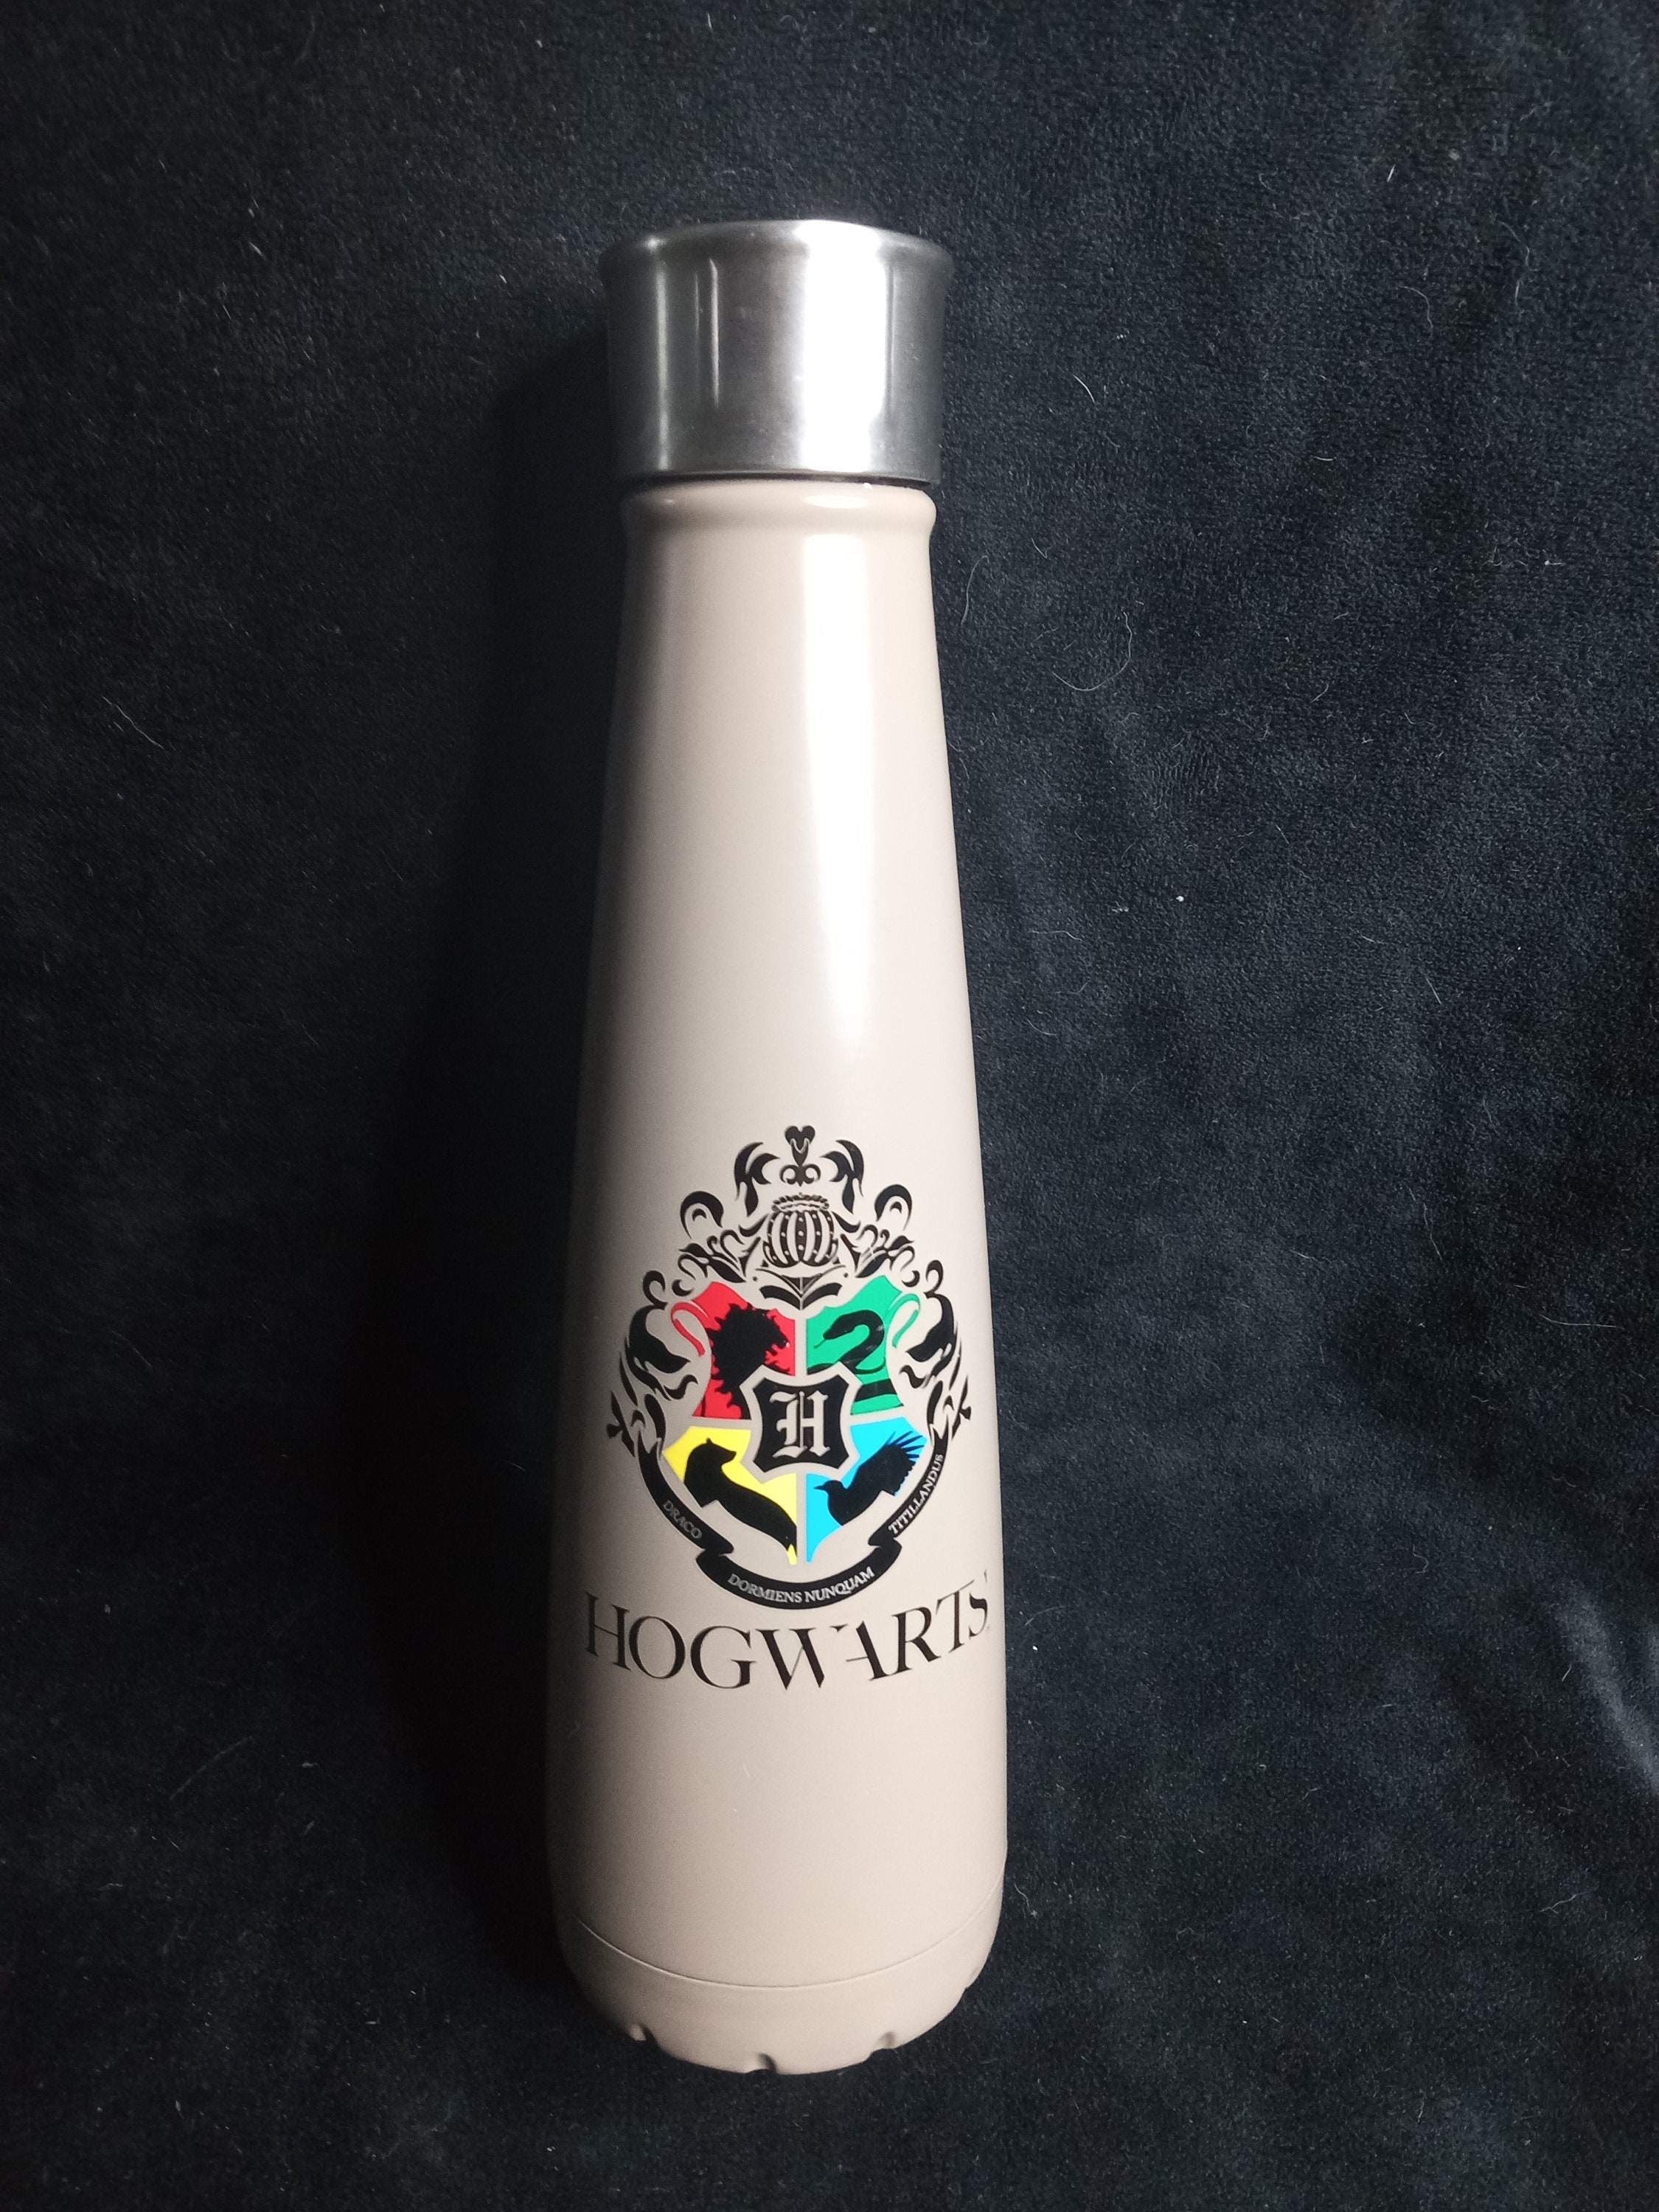 Hogwarts Harry Potter Water Bottle Sip By Swell 15 Oz Stainless